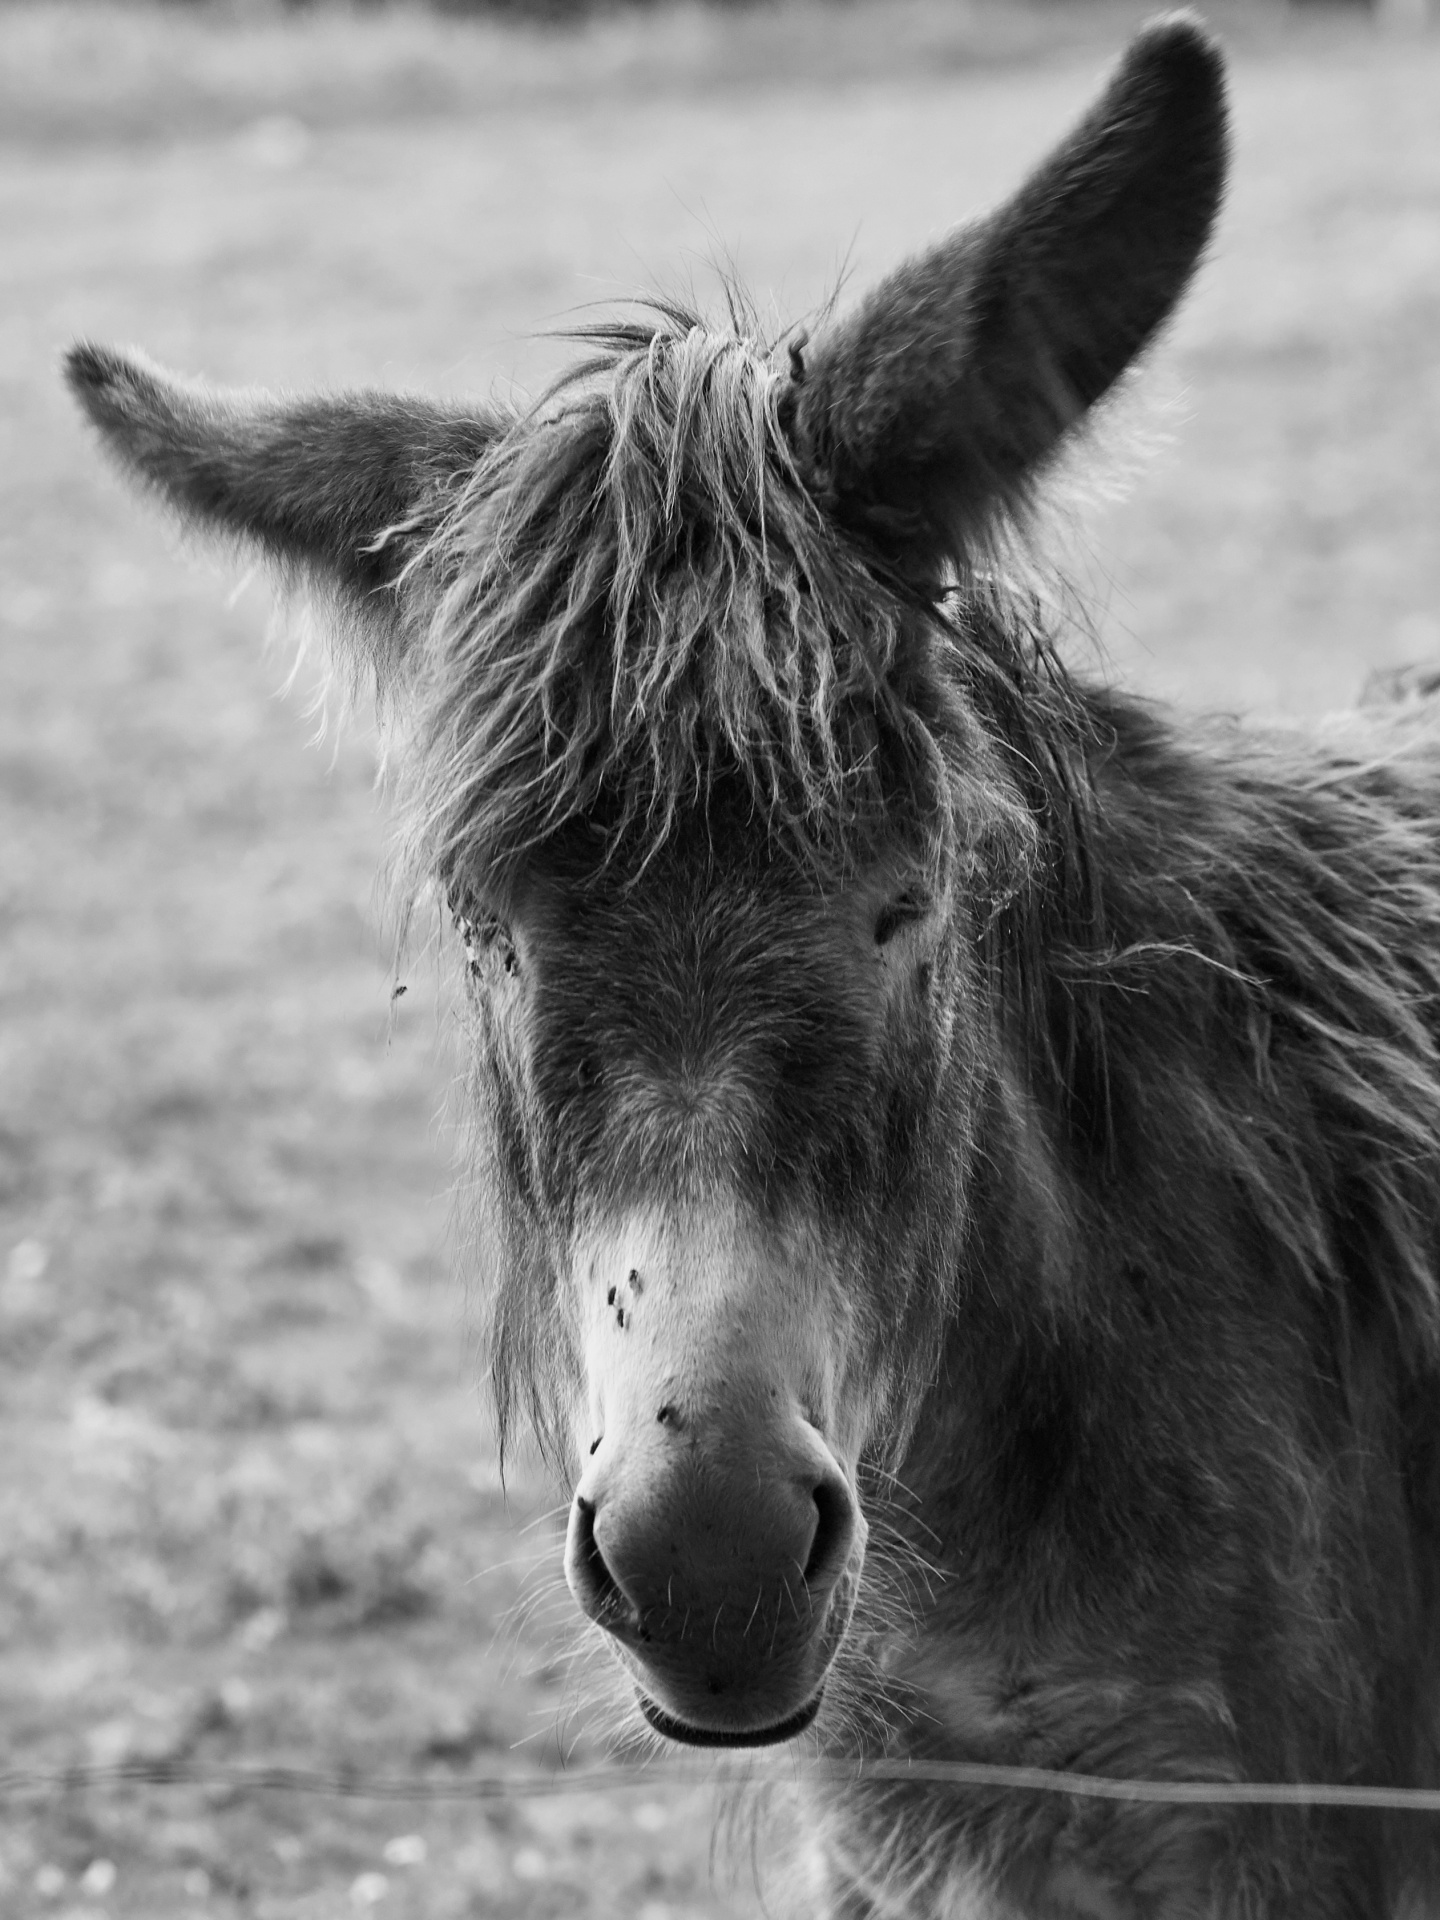 Donkey With Long Ears